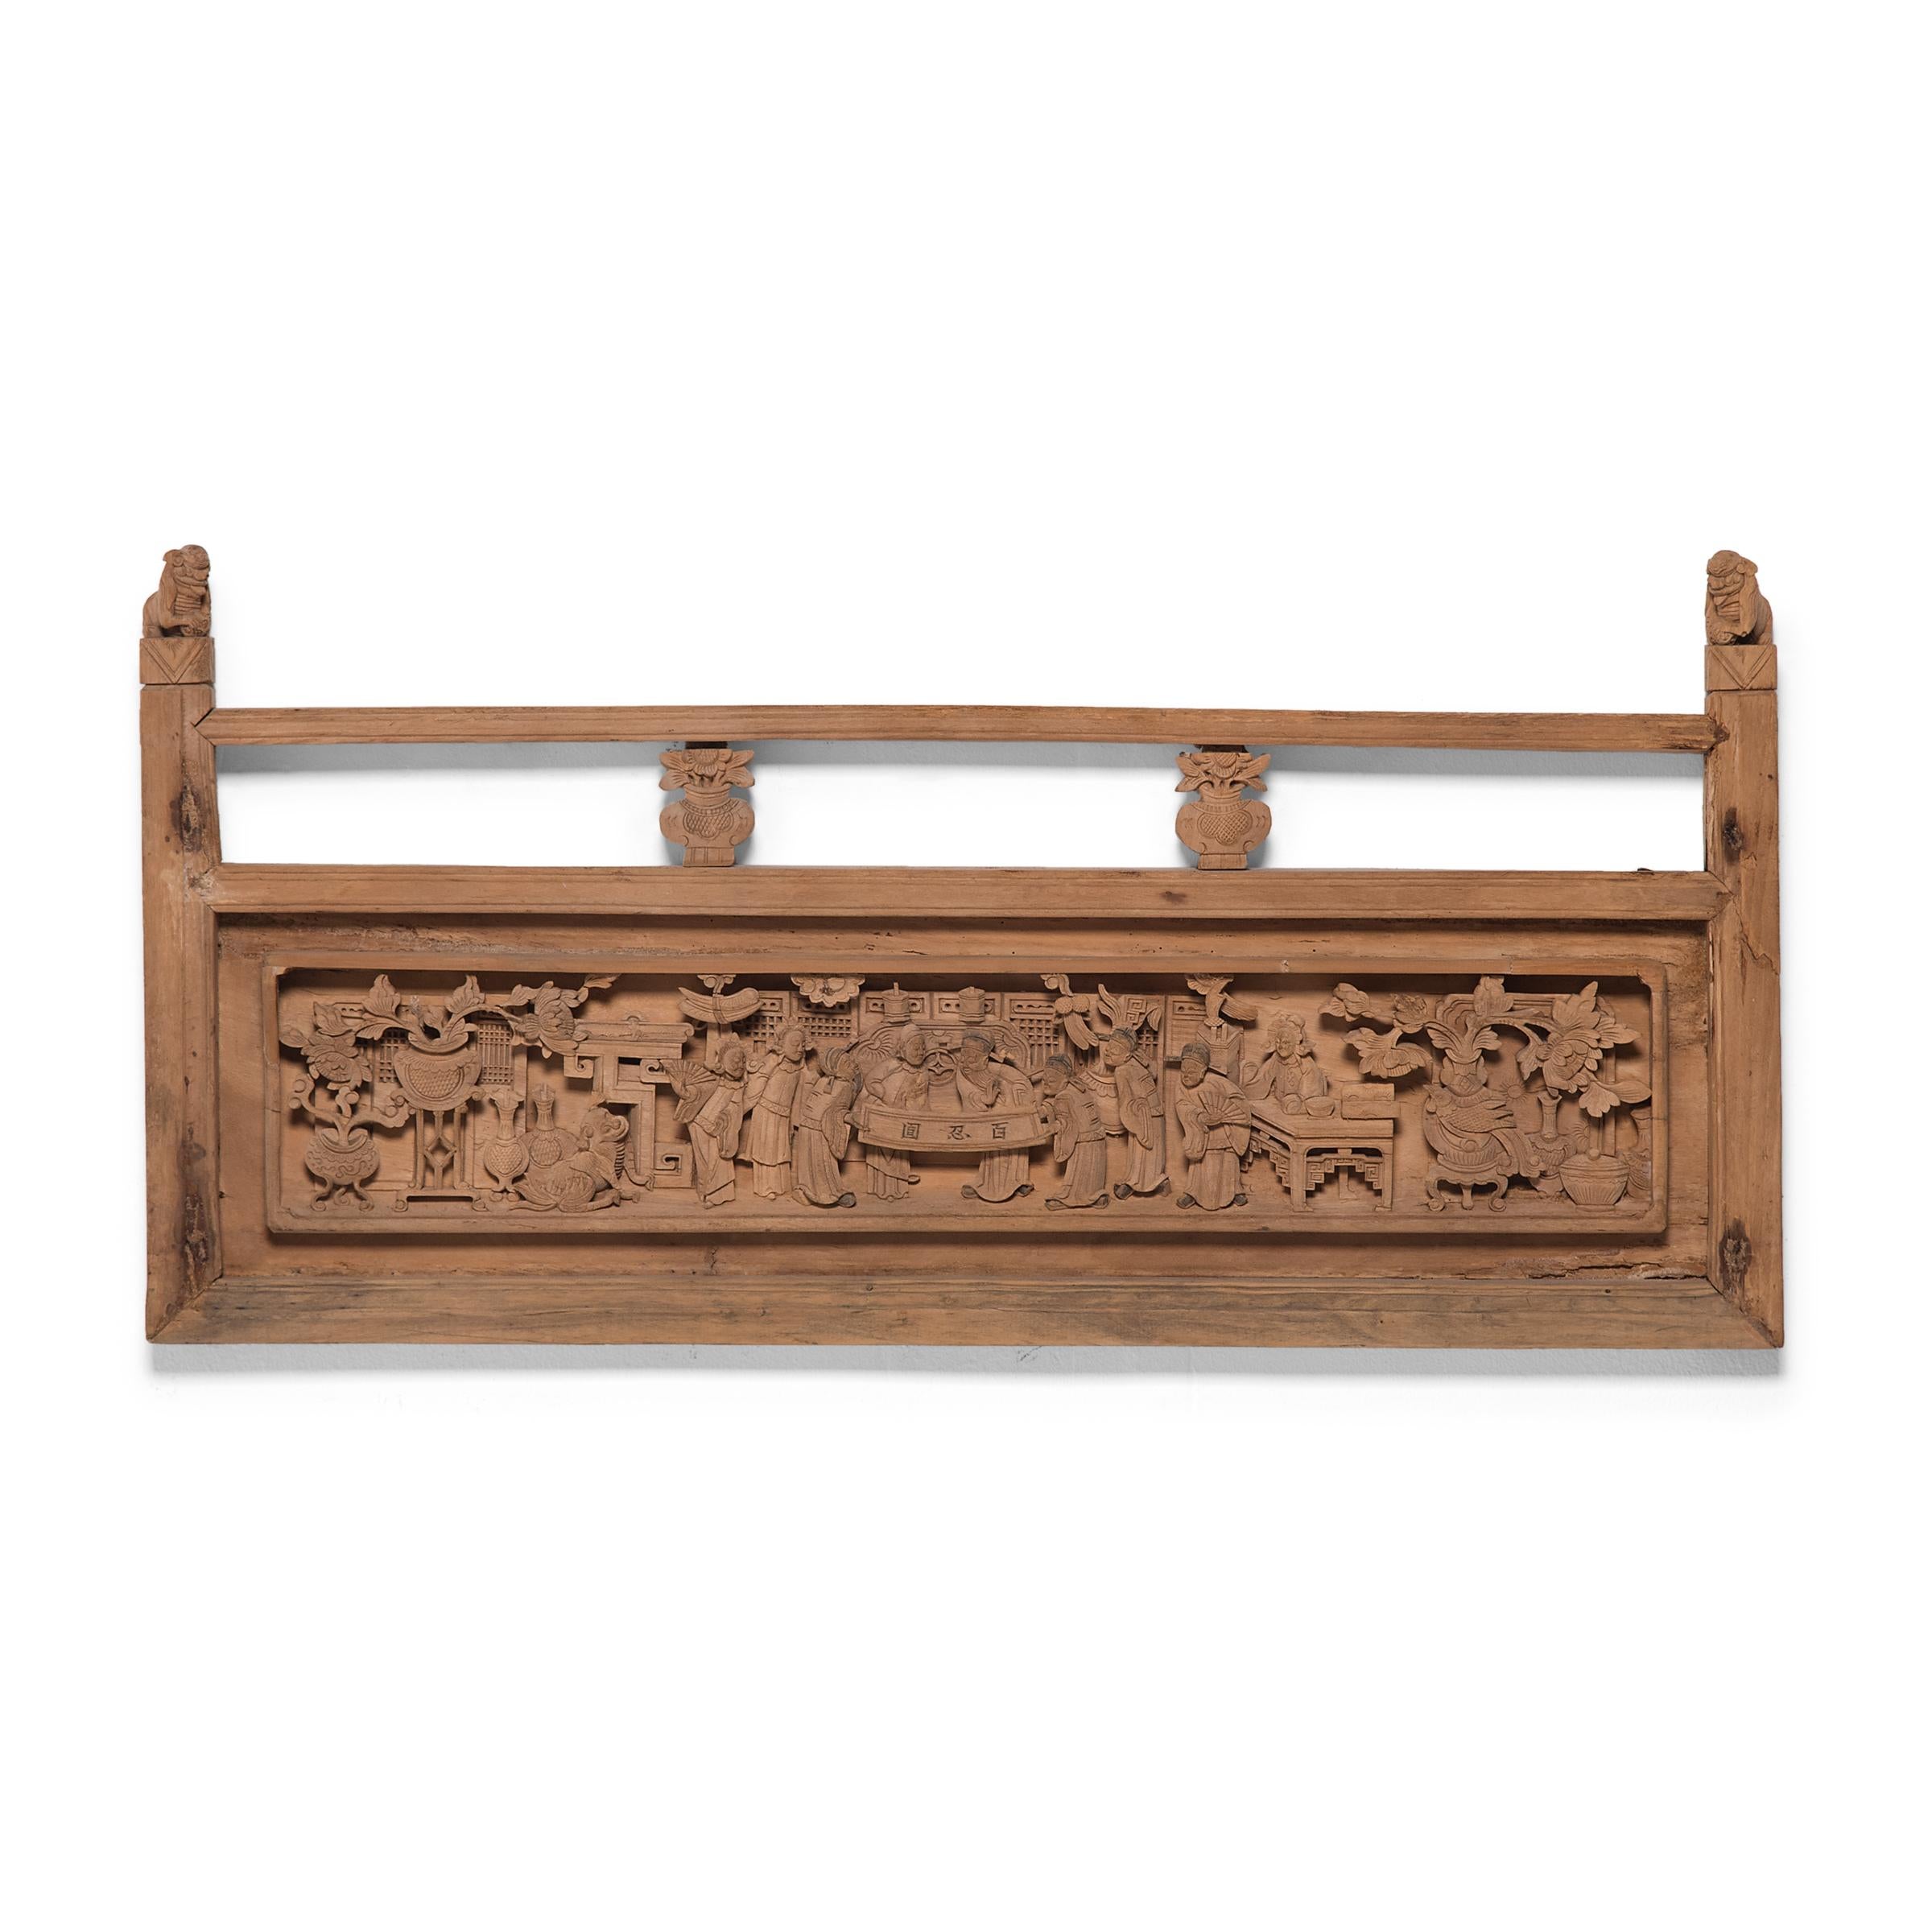 These carved wooden panels were once a part of the railing to a grand Qing-dynasty daybed or canopy bed enclosure. Expertly crafted, the panel displays a beautiful relief carving with intricate details of various robed figures gathered around a